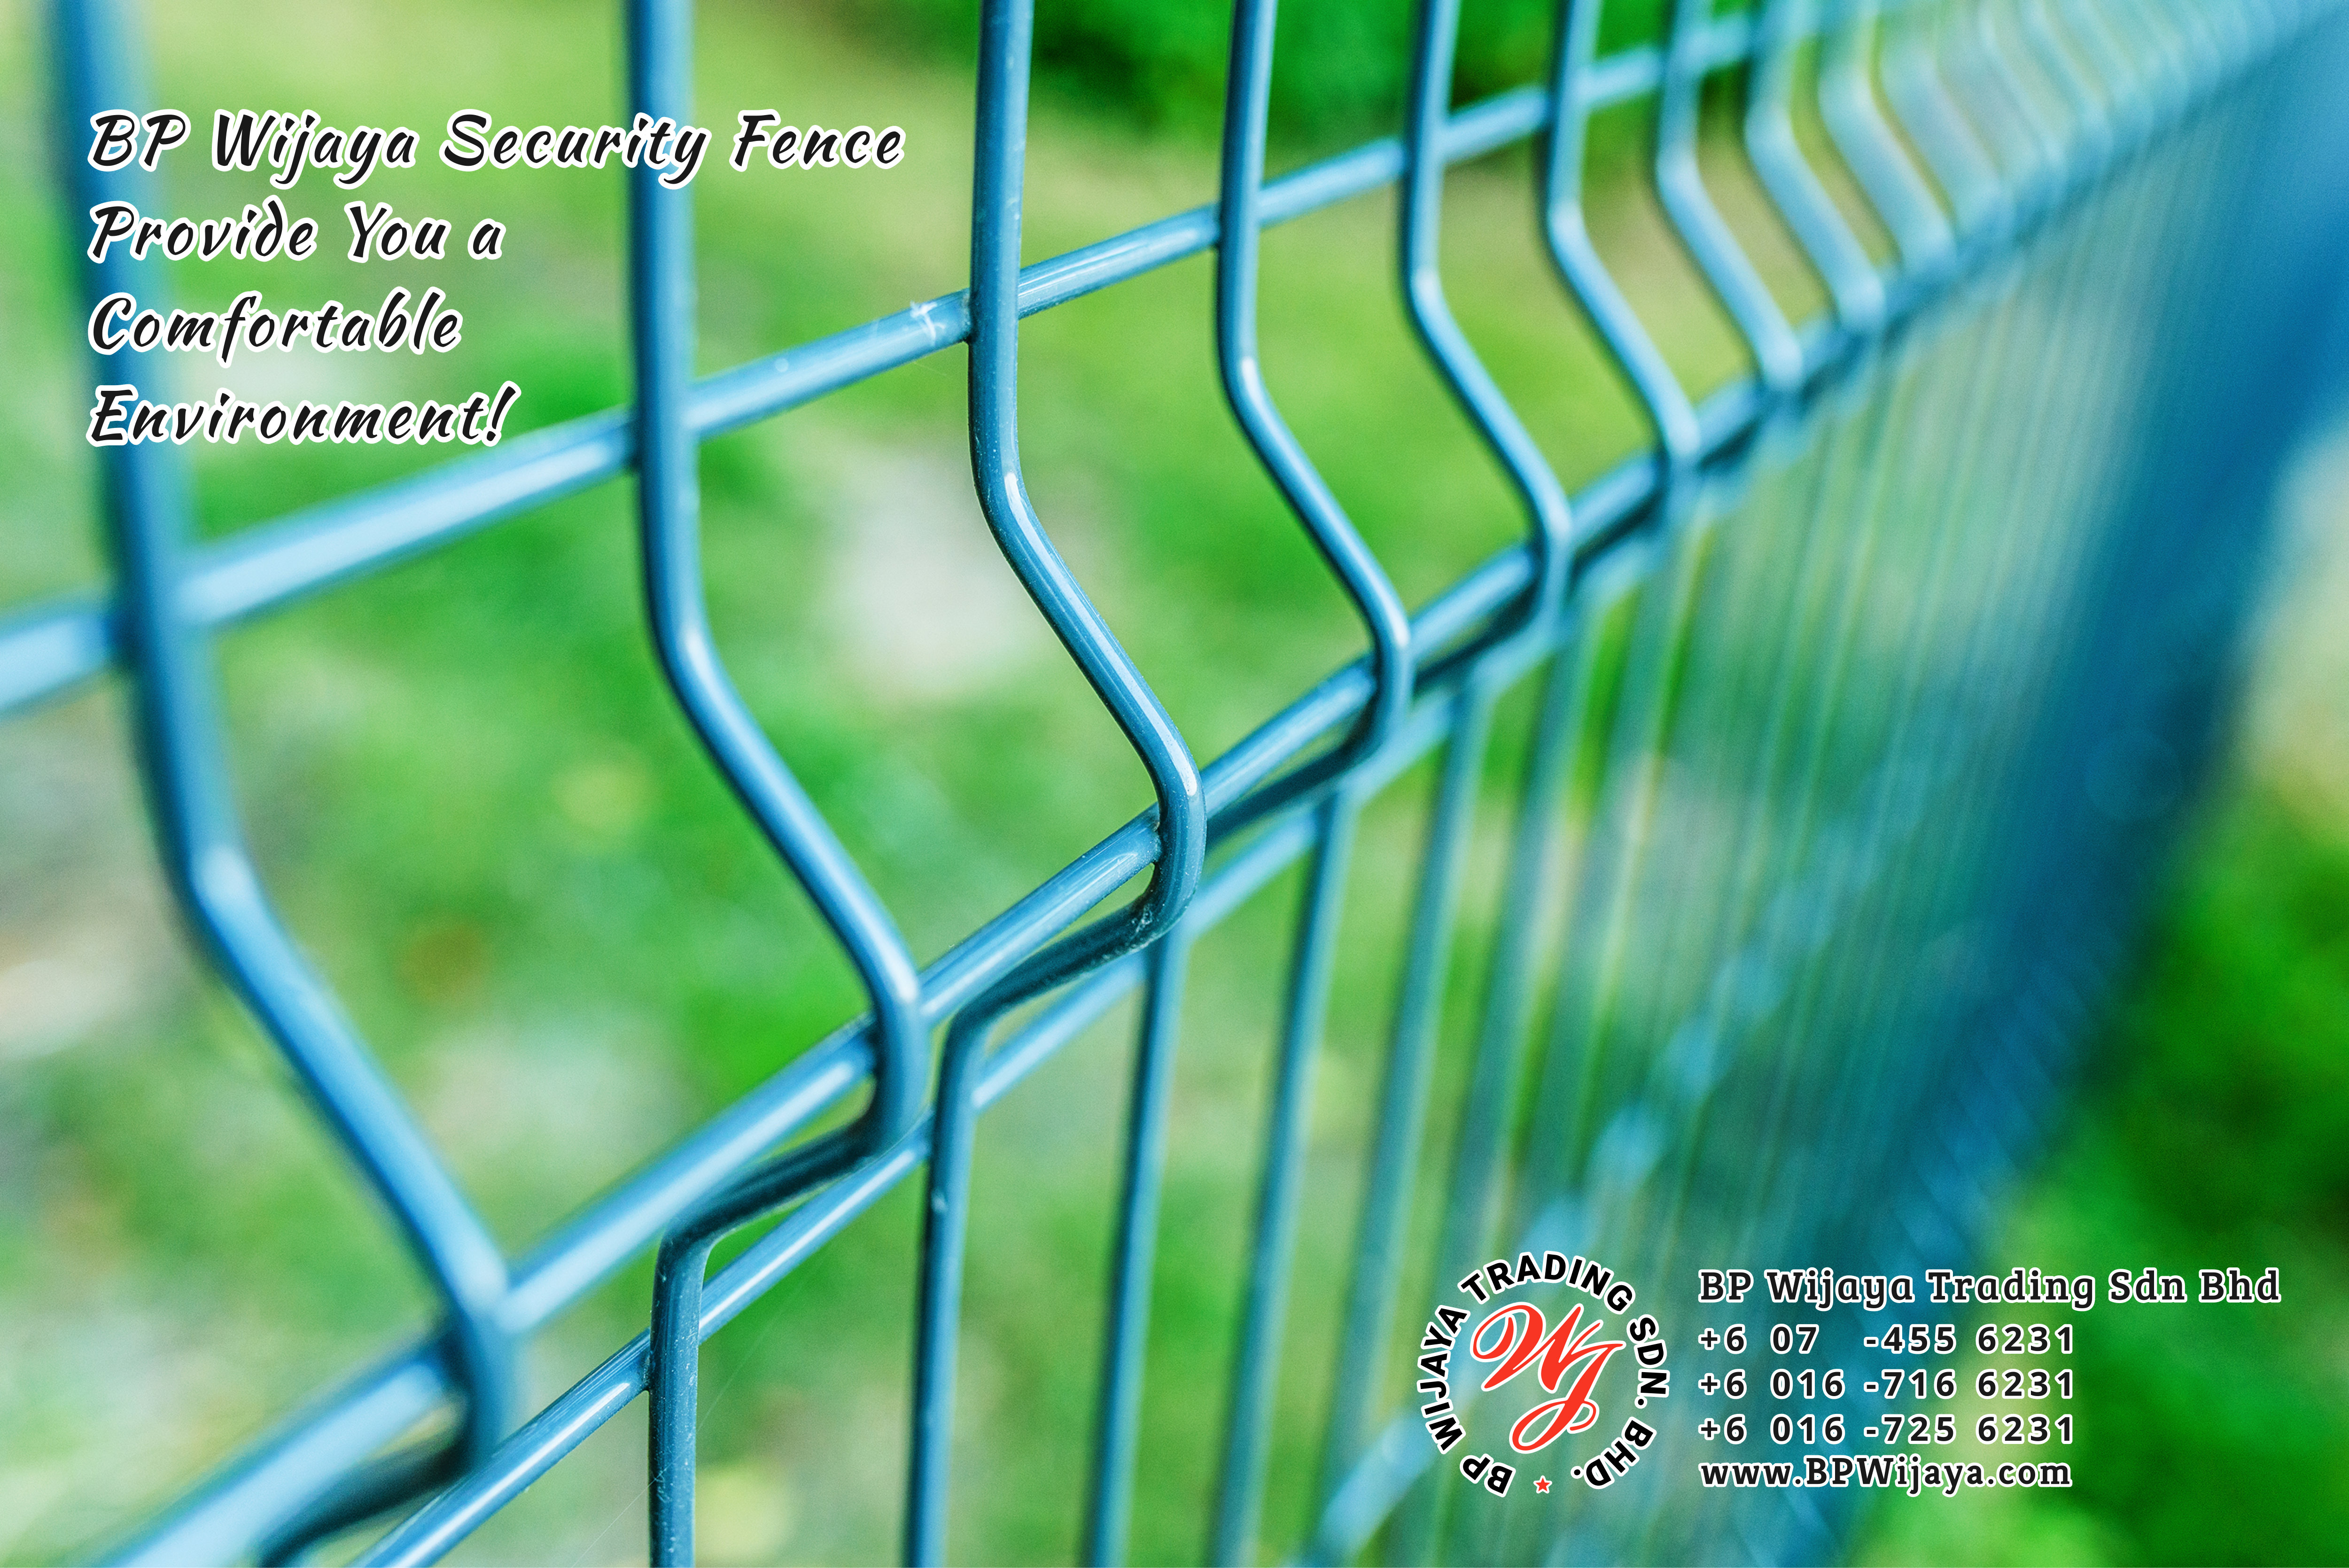 BP Wijaya Trading Sdn Bhd Malaysia Selangor Kuala Lumpur manufacturer of safety fences building materials for housing construction site Security fencing factory security home security A03-10